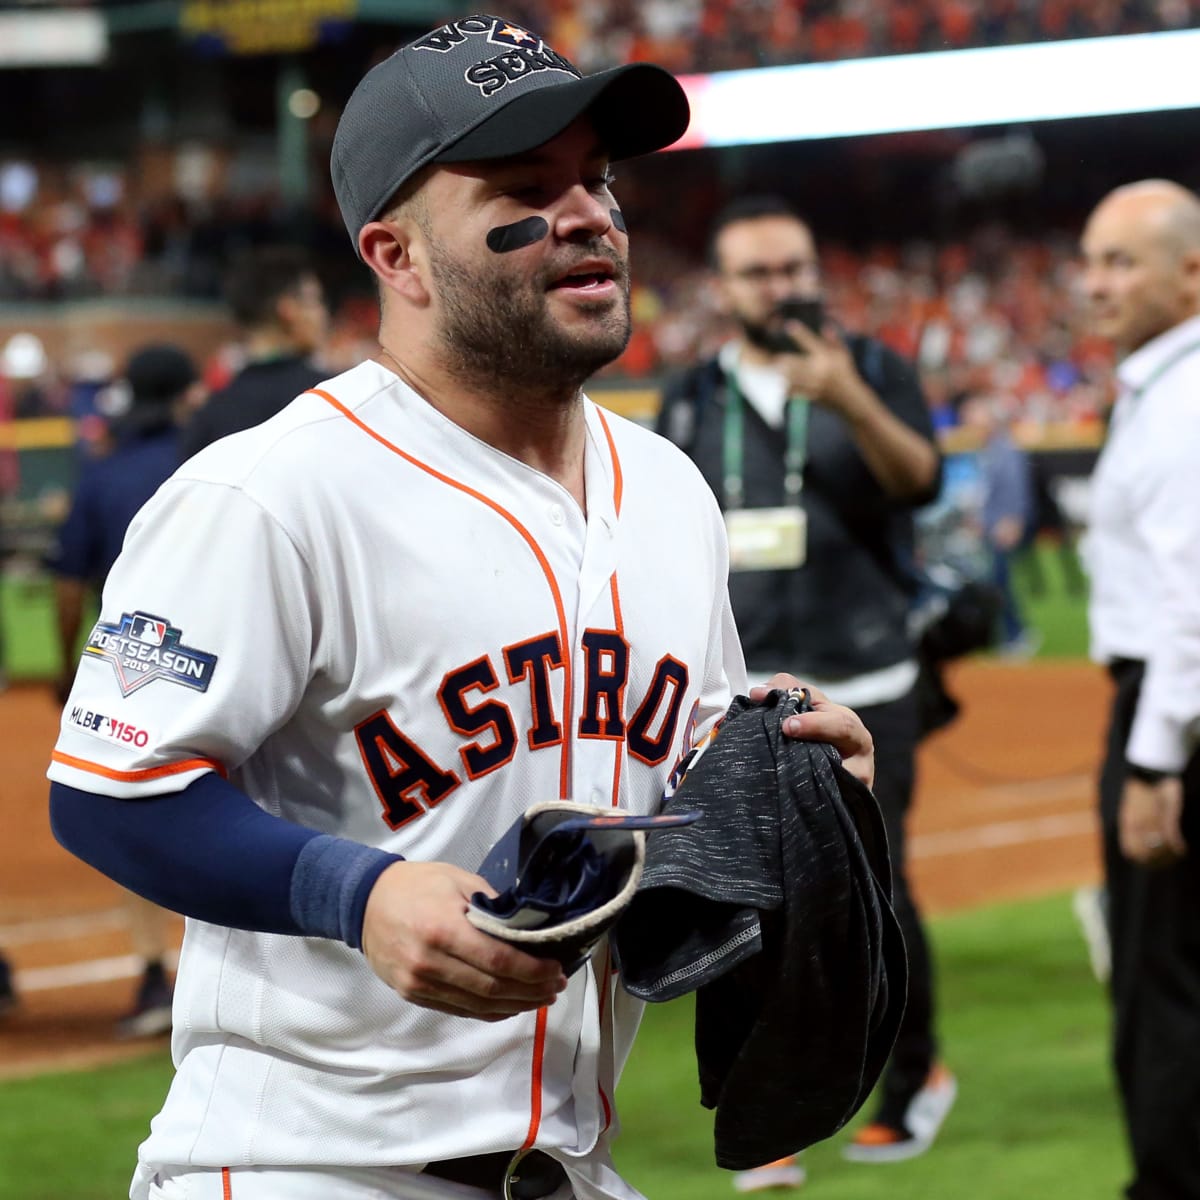 Why the Astros 2019 World Series loss still stings for fans